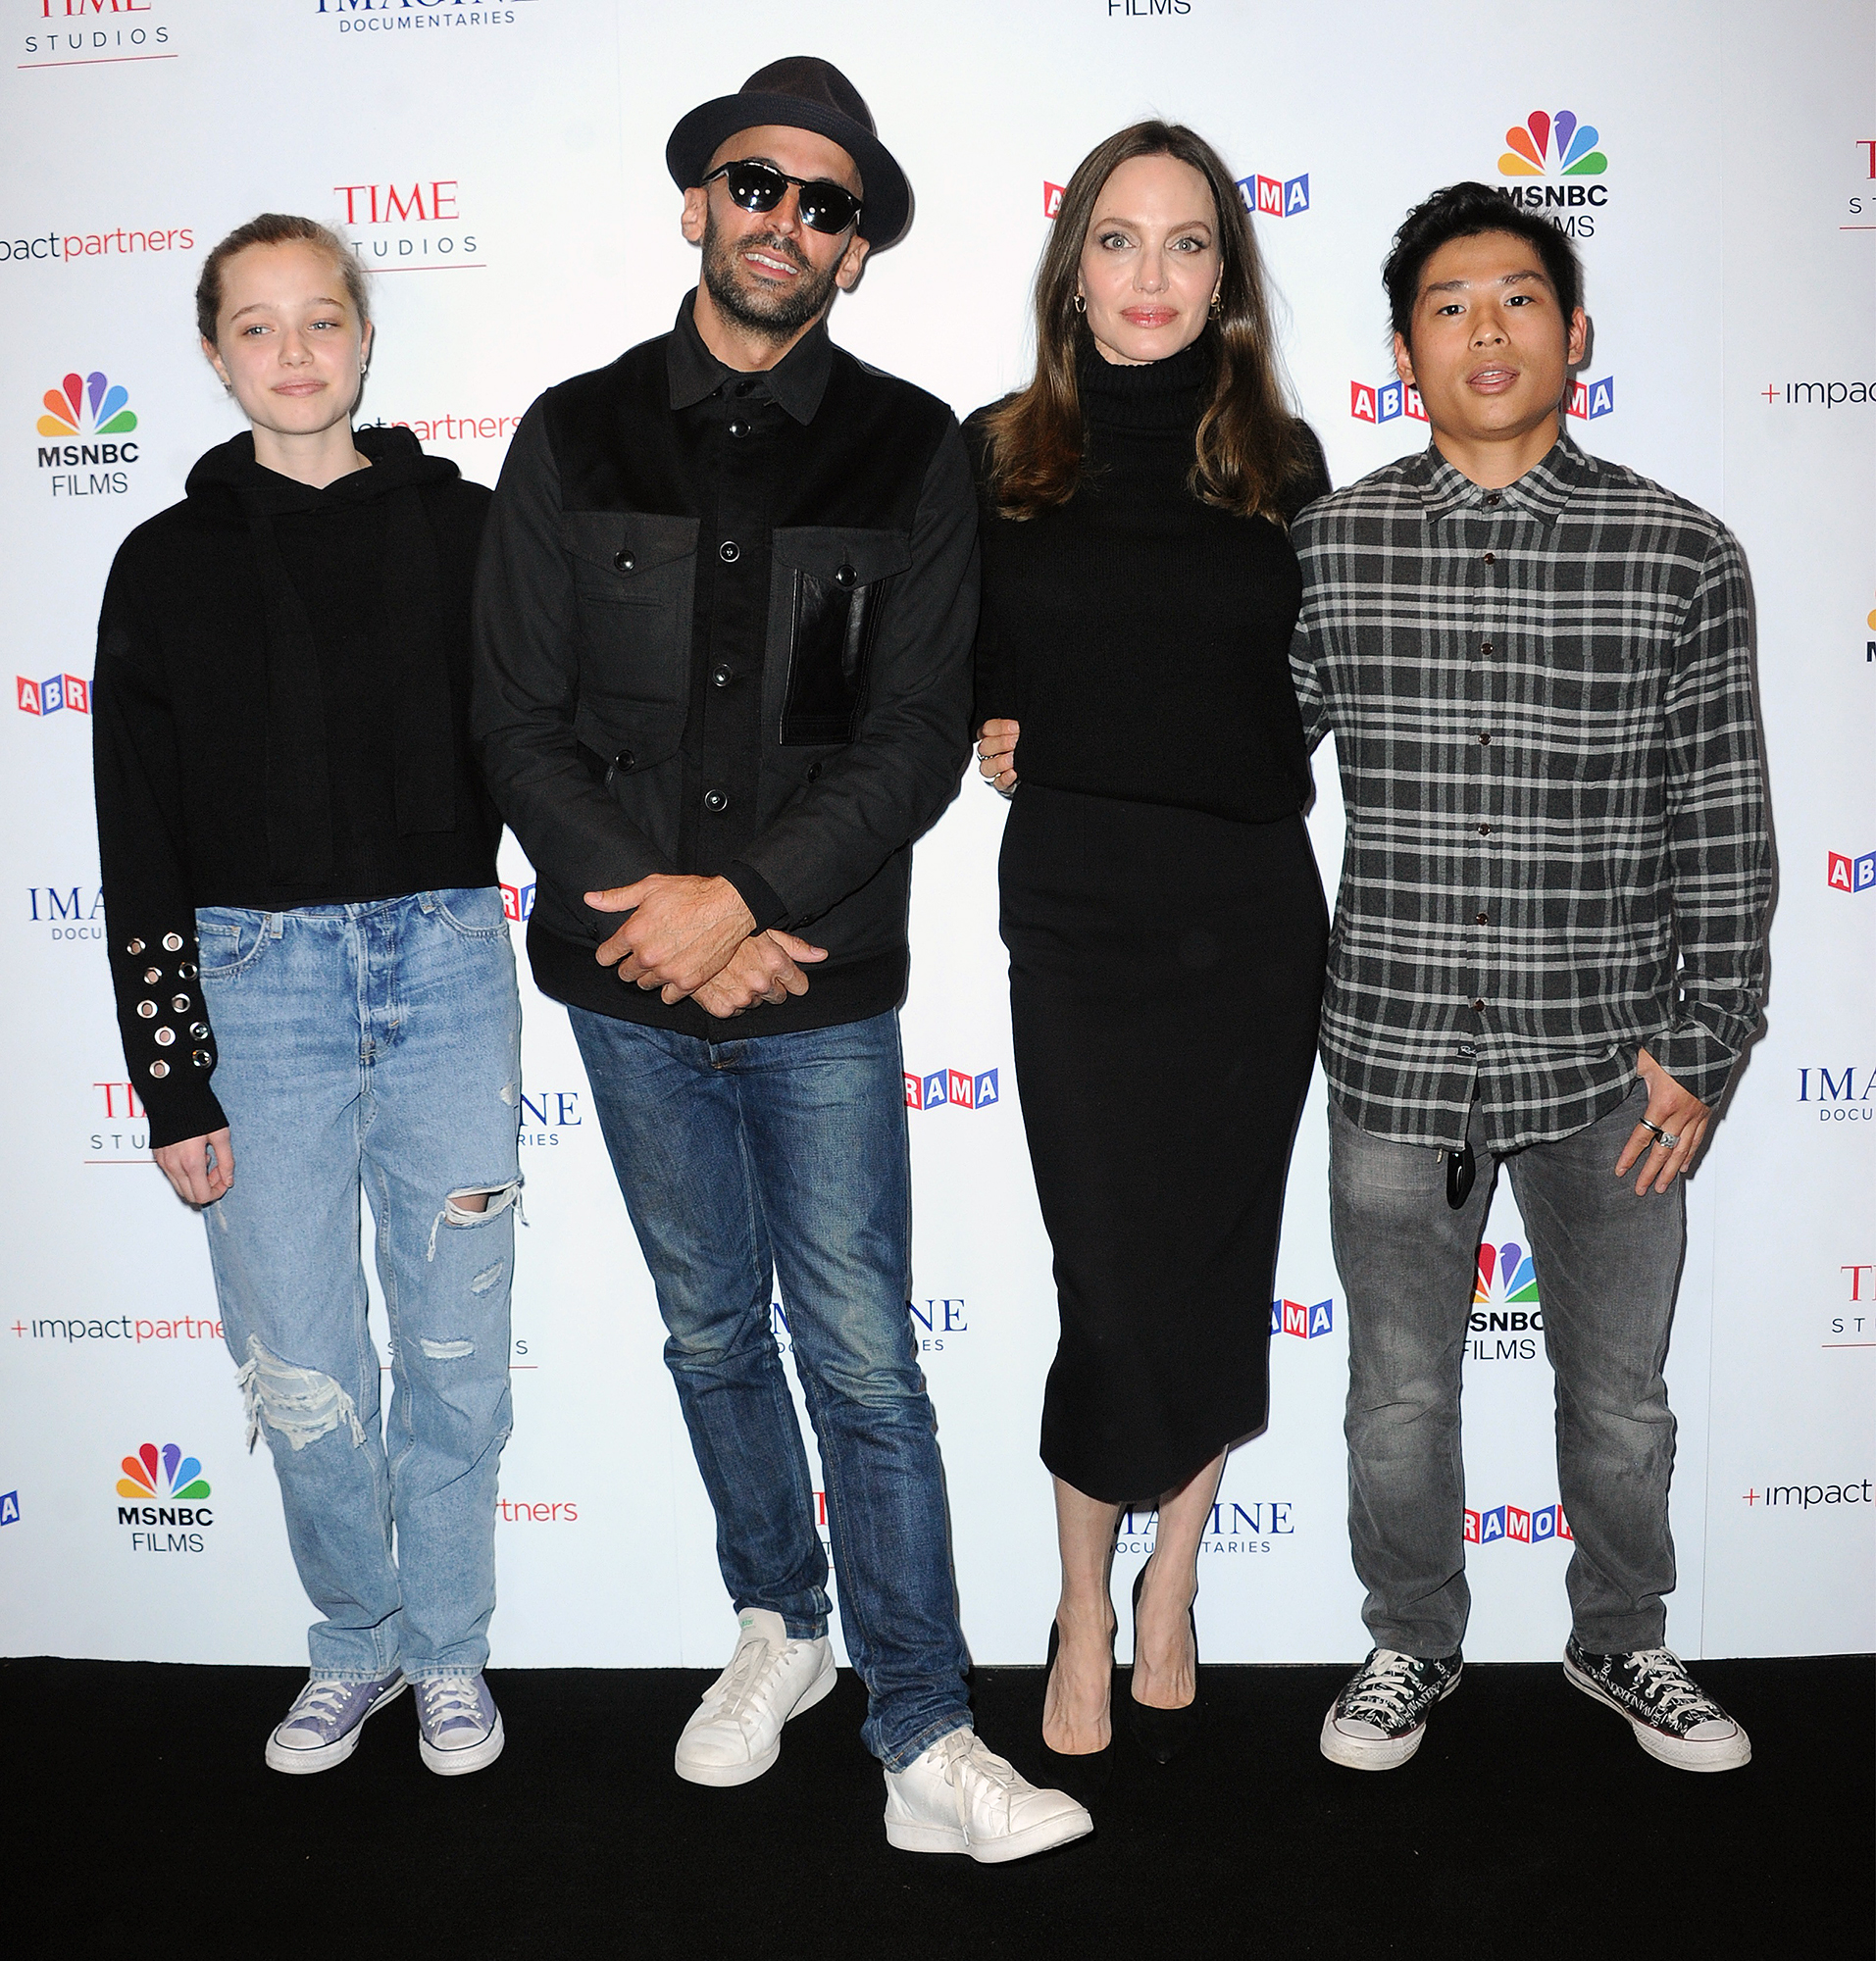 Jolie-Pitt Wears Ripped Jeans and Hoodie on Carpet